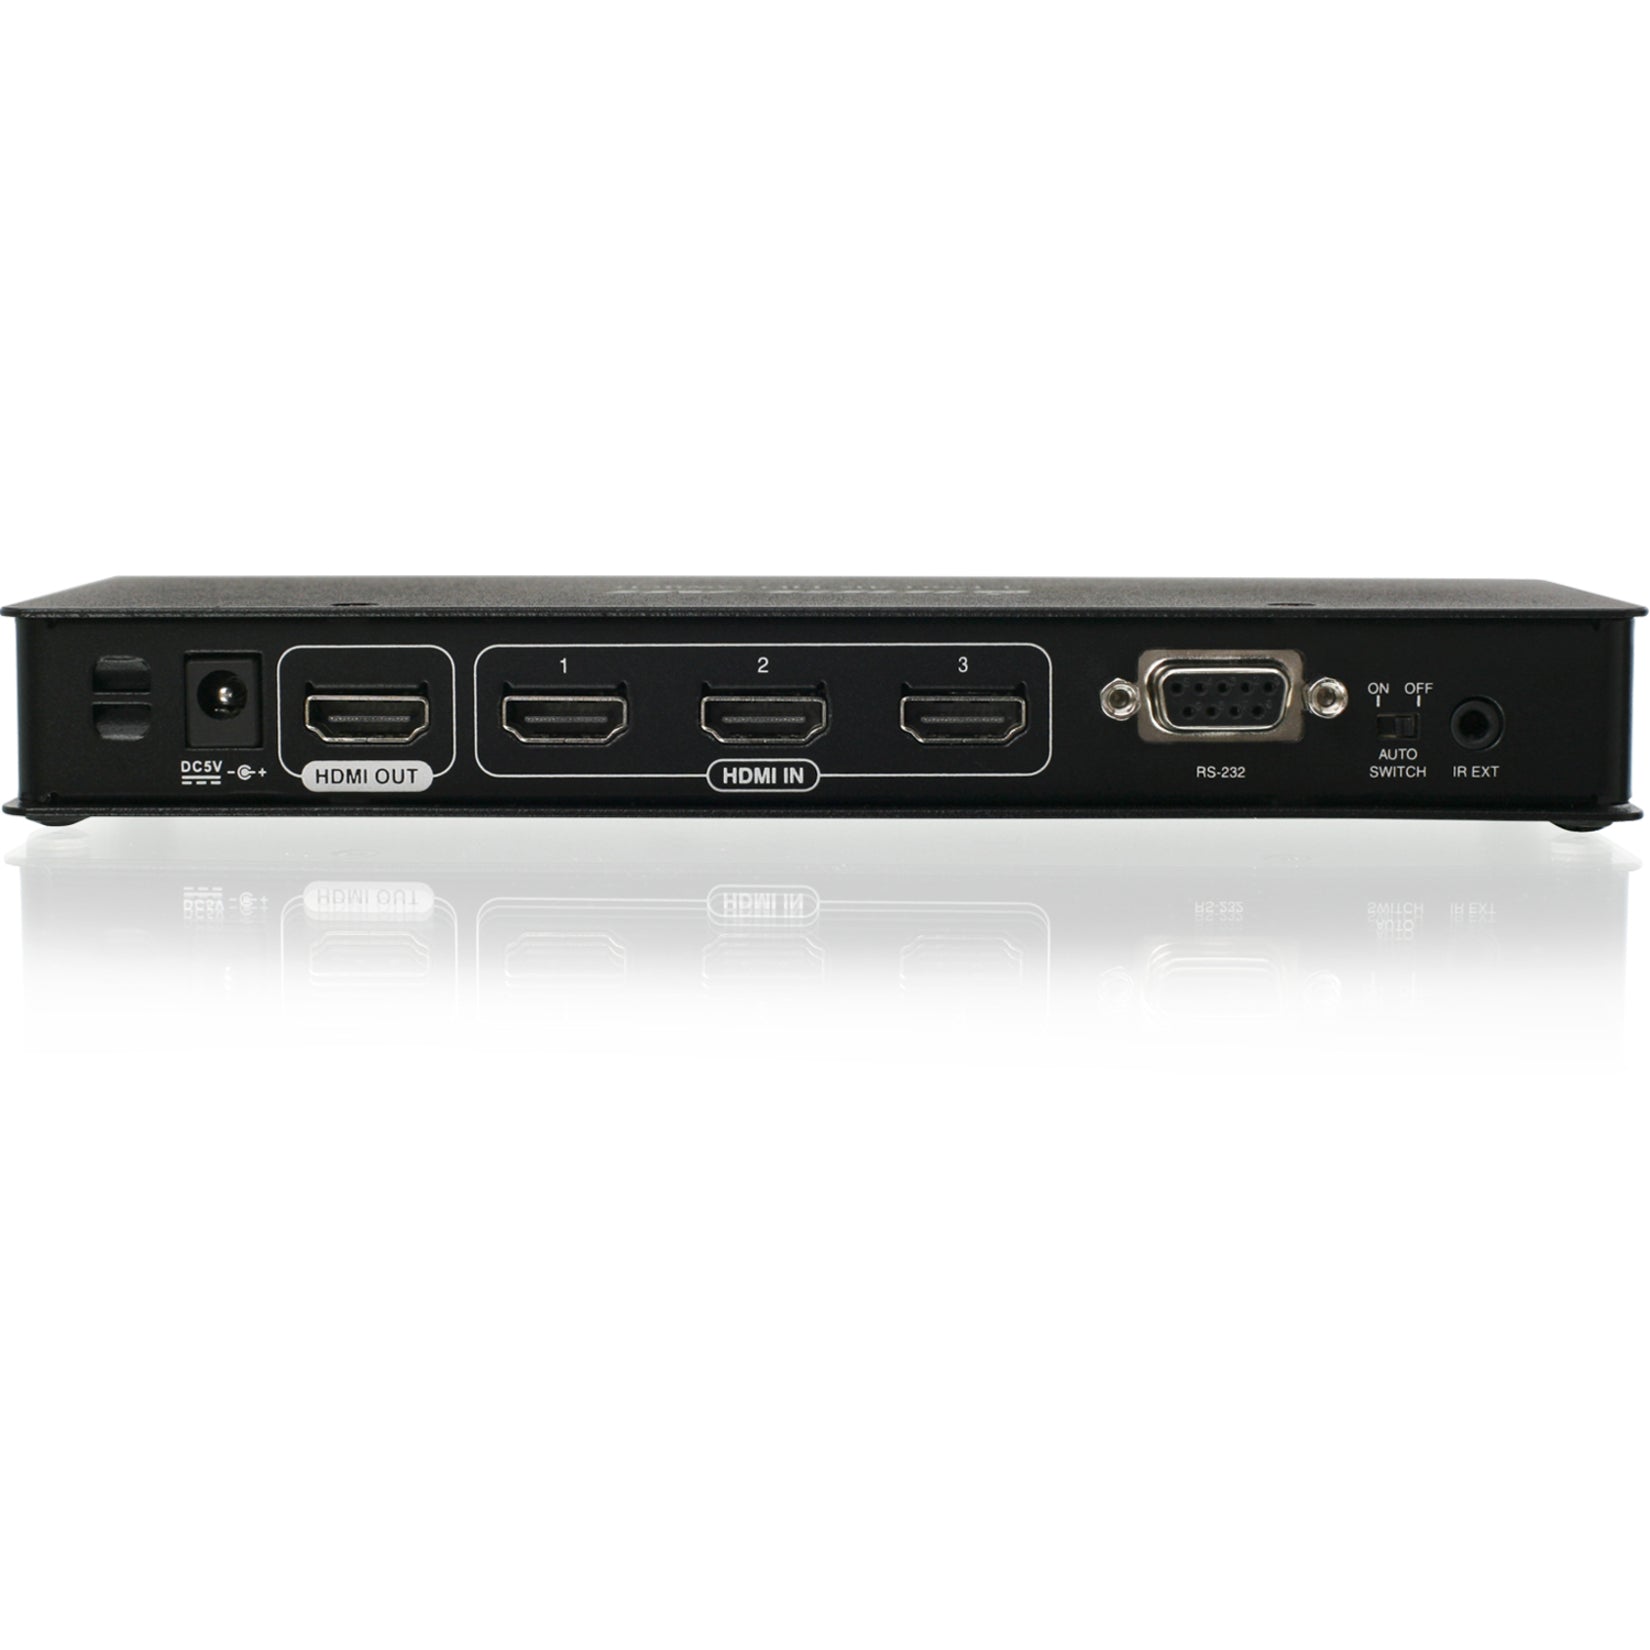 IOGEAR GHSW8441 True 4K 4-Port Switcher with HDMI Connection, 4K Video Resolution, 3-Year Warranty, HDMI In/Out